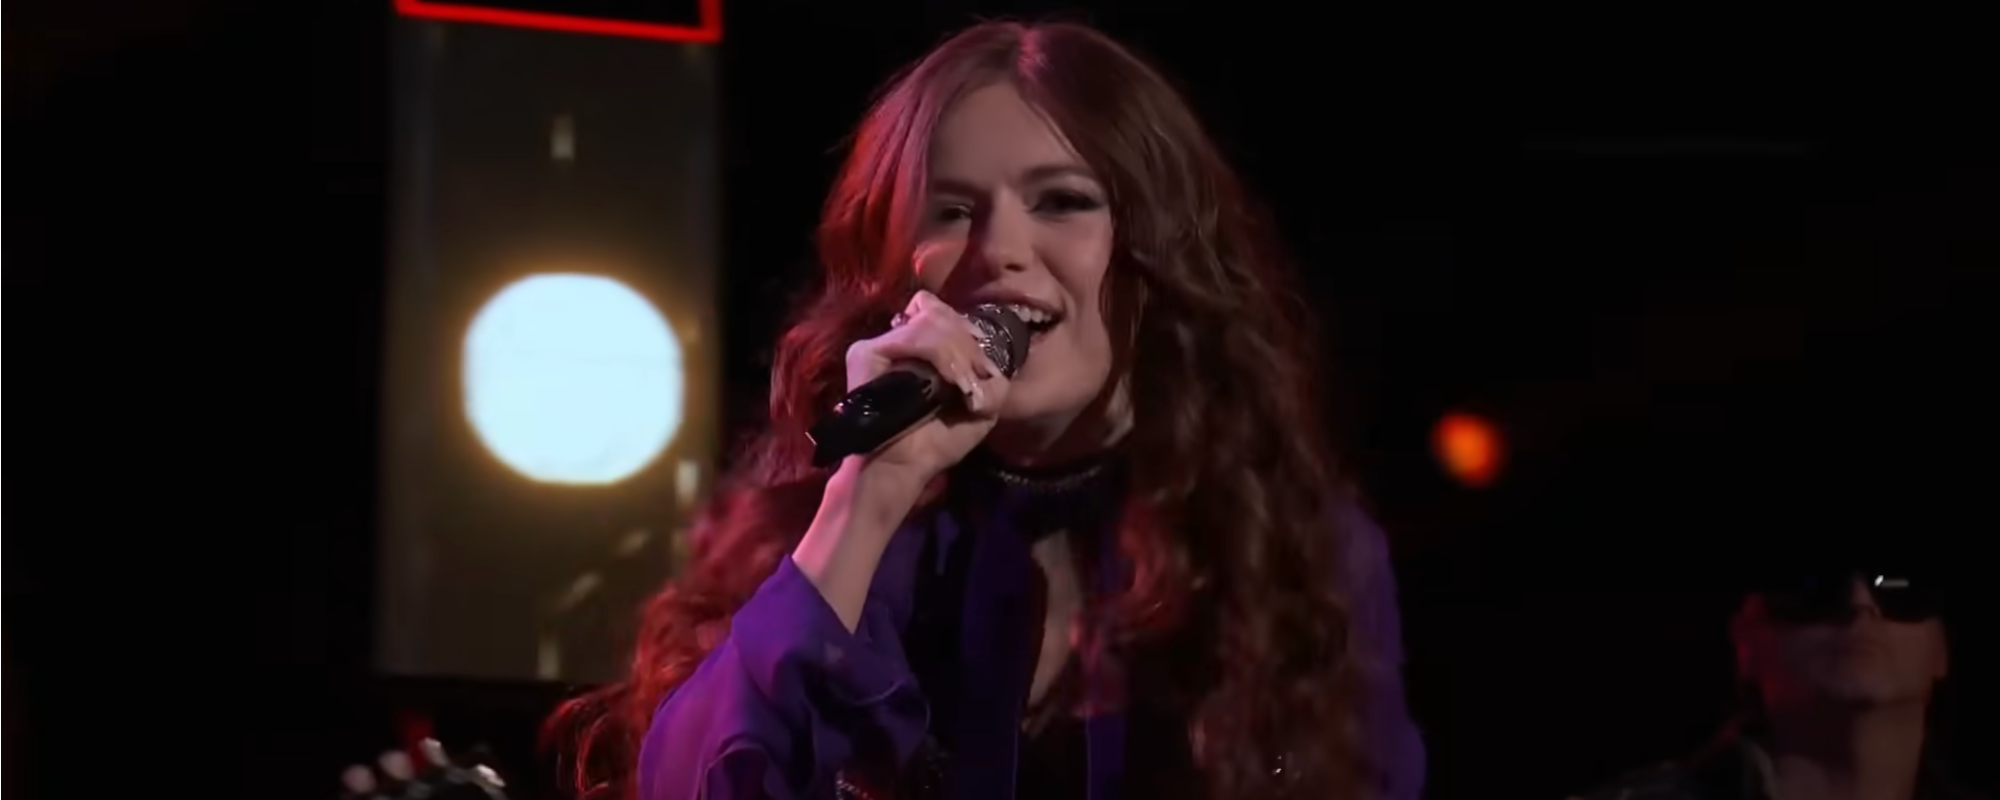 Mara Justine Knocks It Out the Park With Flawless “Piece of My Heart” Performance on ‘The Voice’ Finale